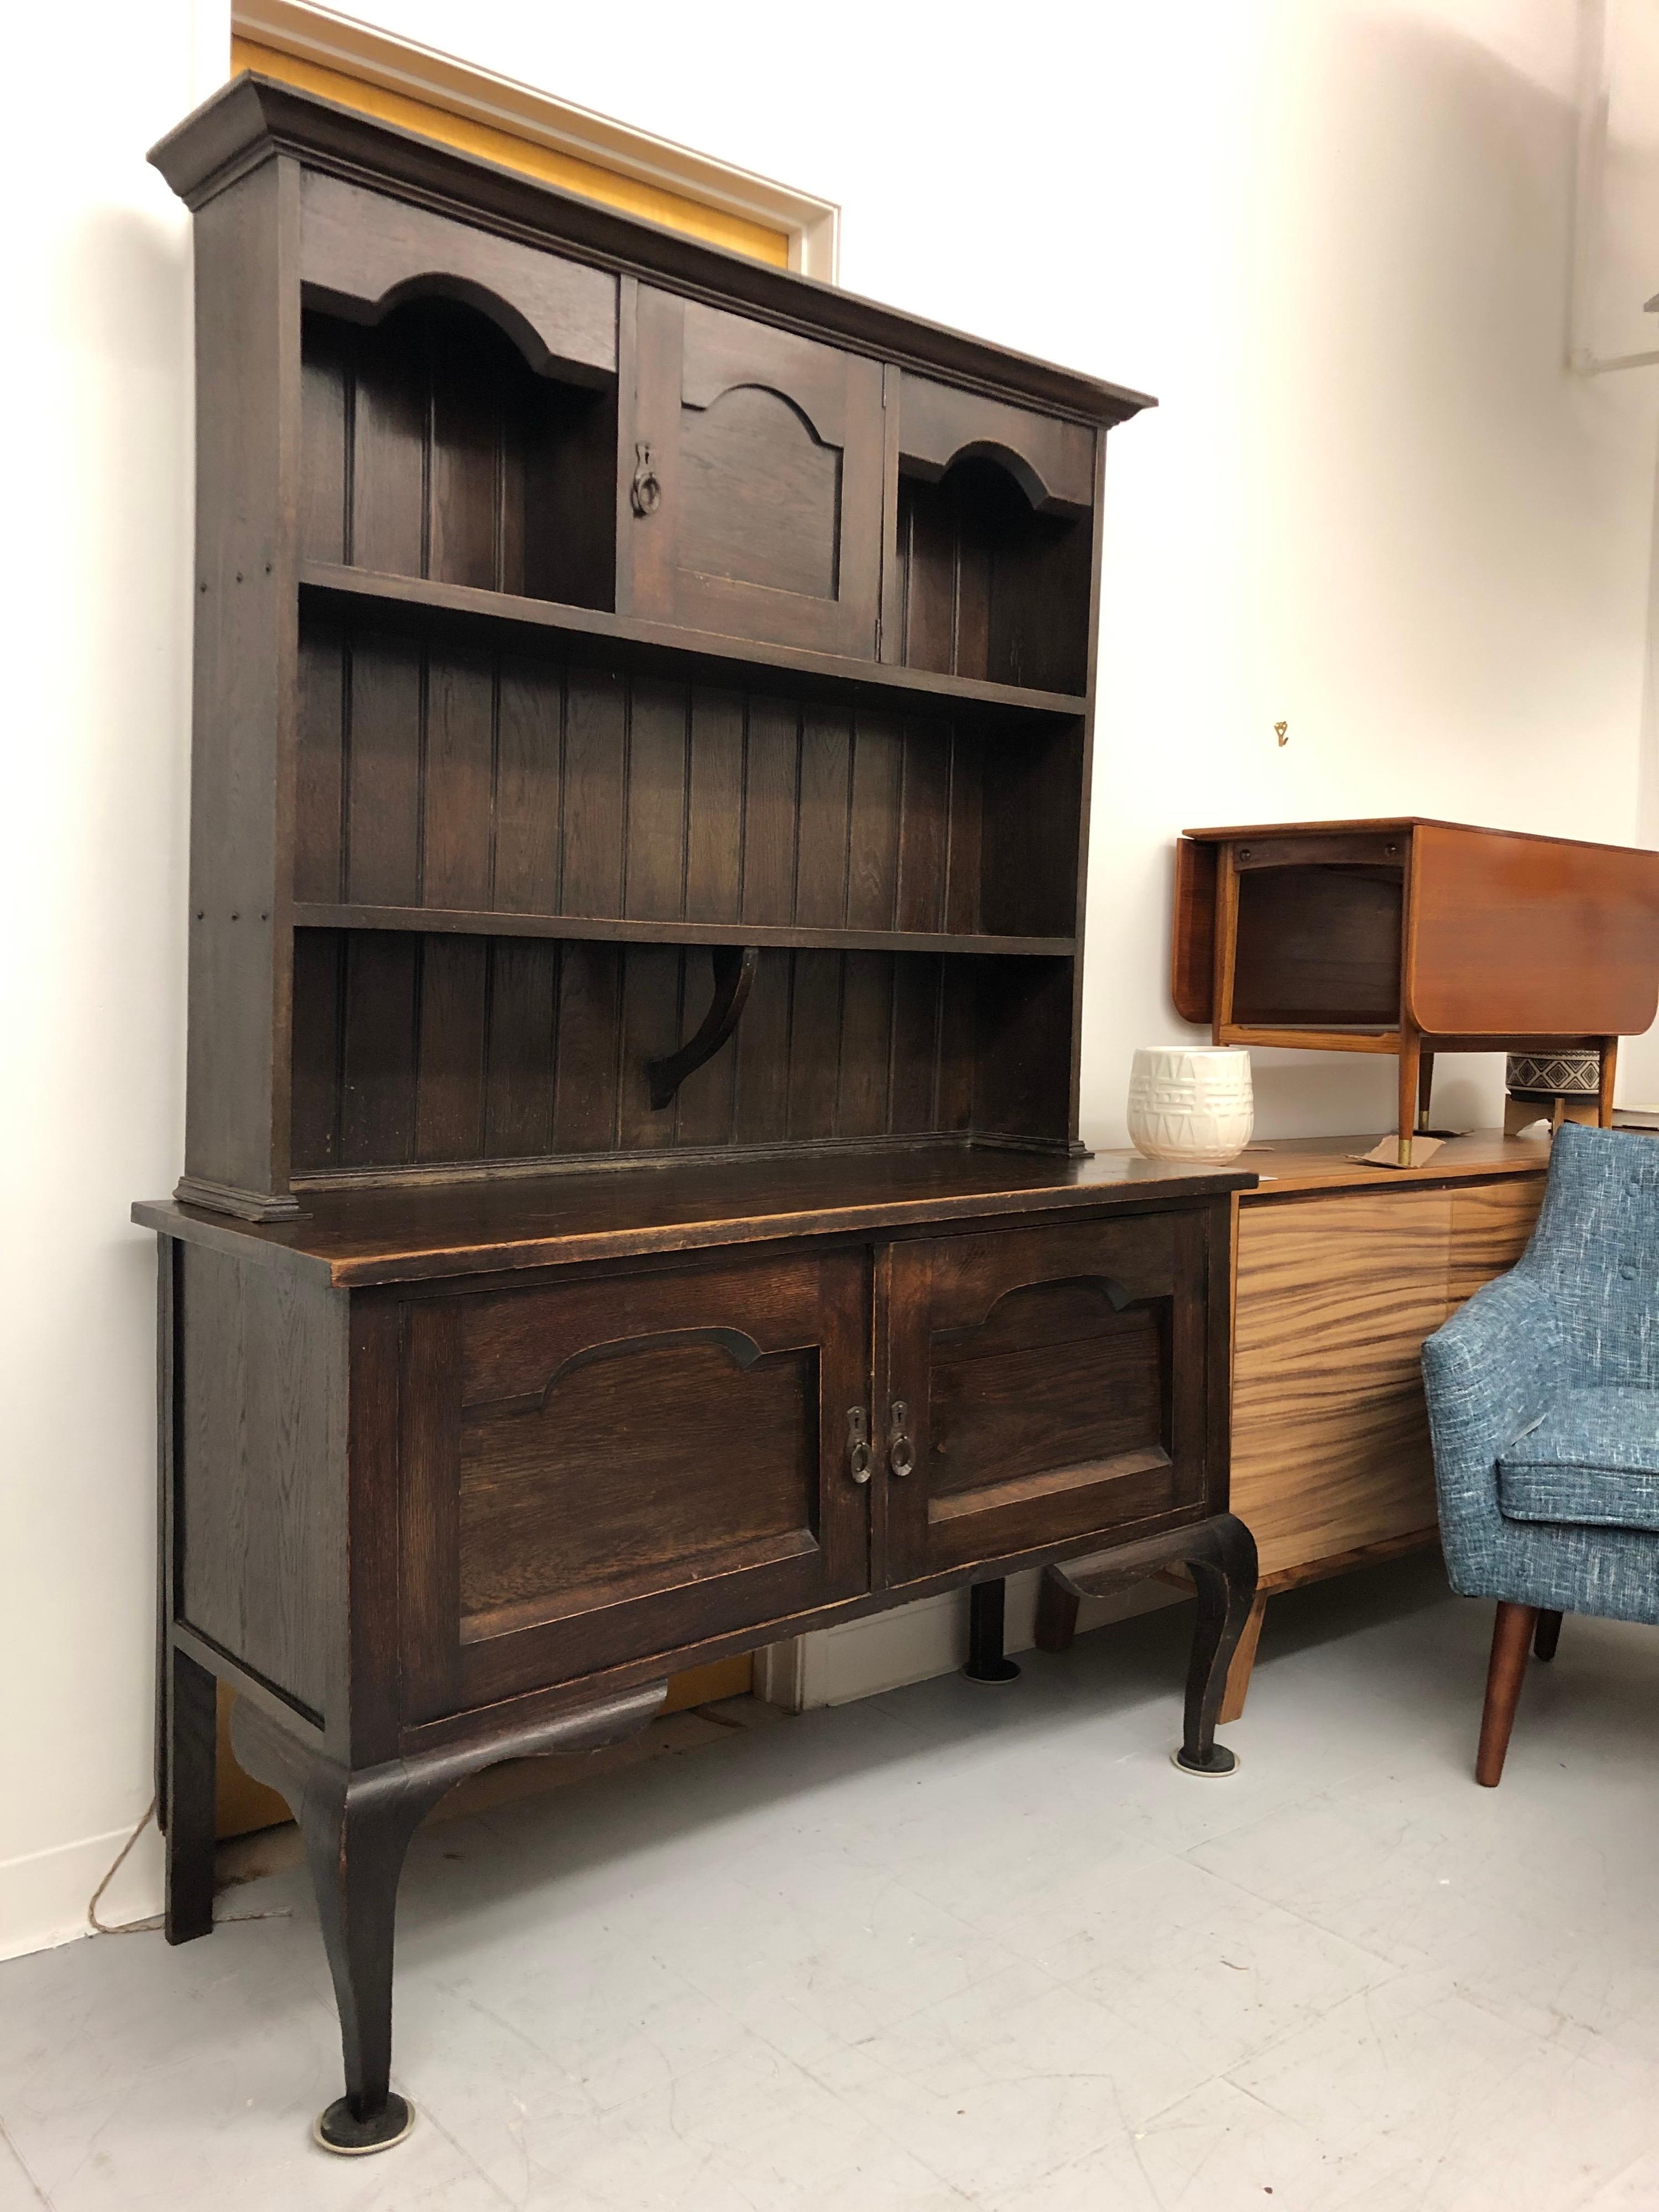 A late 18th century two-part English oak Welsh server or buffet or sideboard with an exceptional patina from the Georgian period. The upper section has three shelves and a central cupboard door. The lower section has a french frame style design and